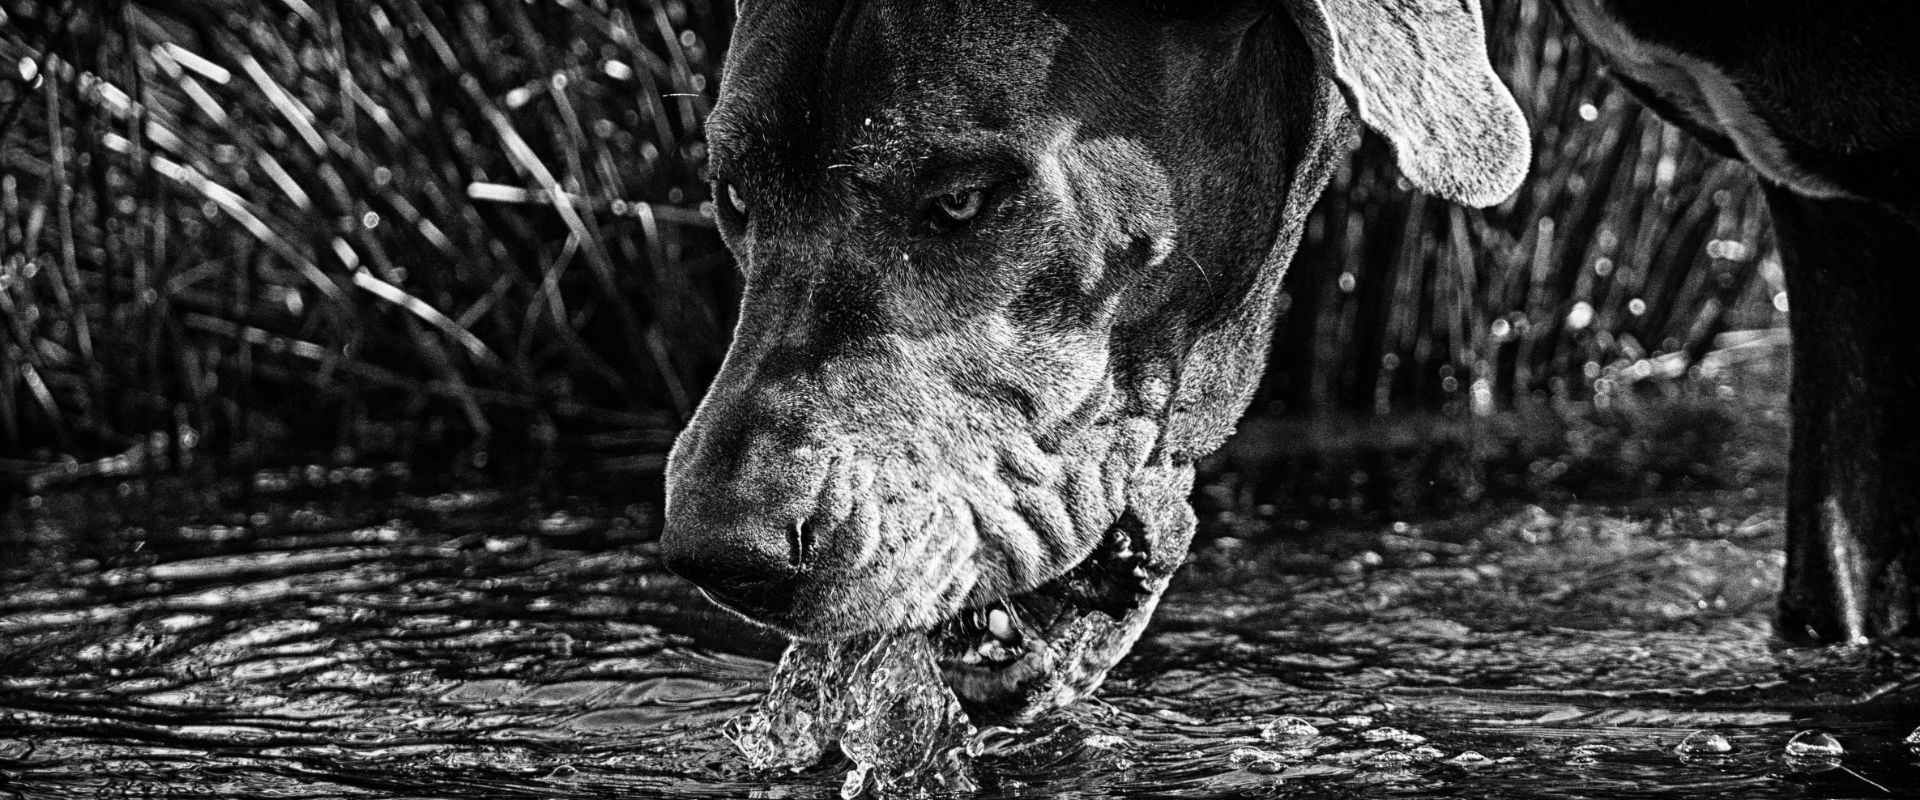 The Hound having a drink of water